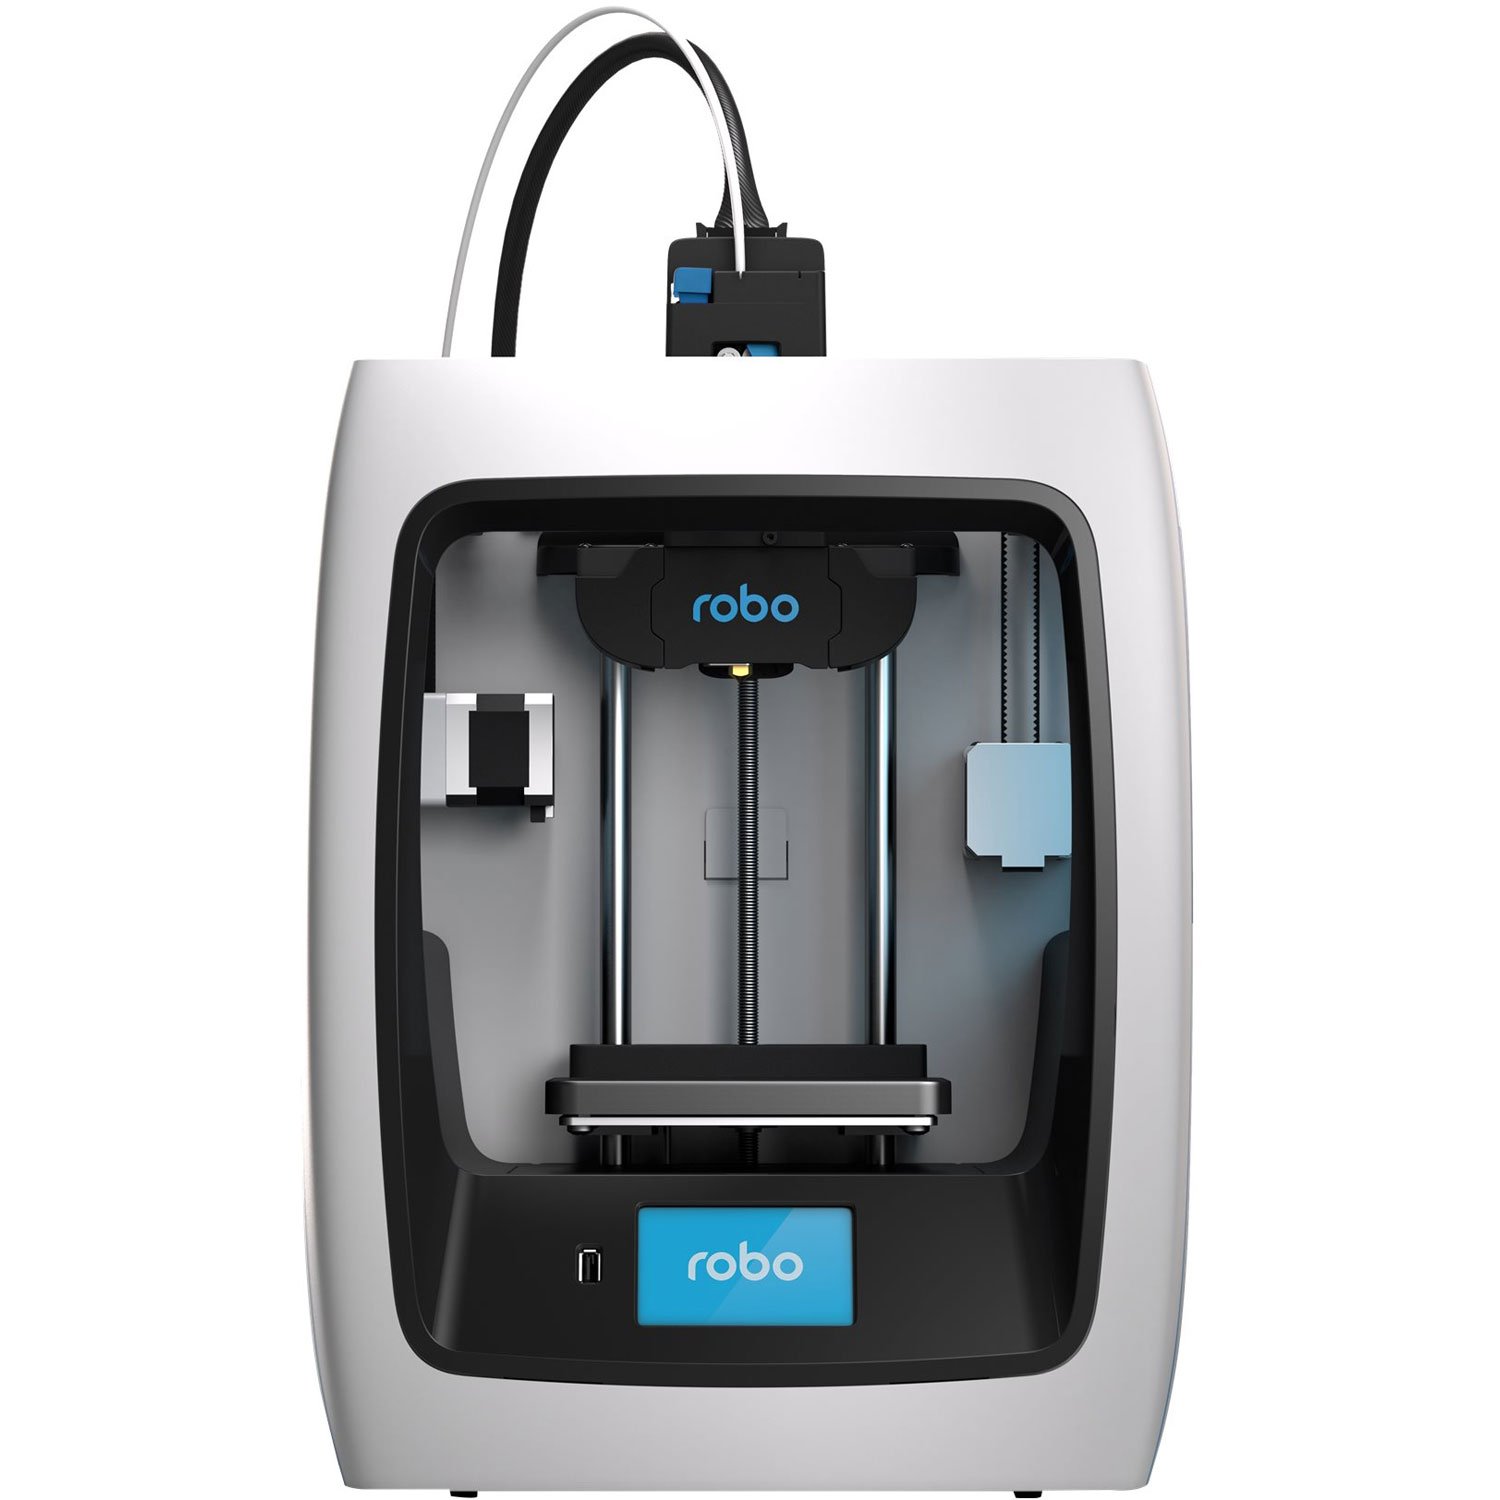 Robo C2 Smart Assembled 3D Printer with WiFi, 5x5x6” Build Volume for Educators and Innovators